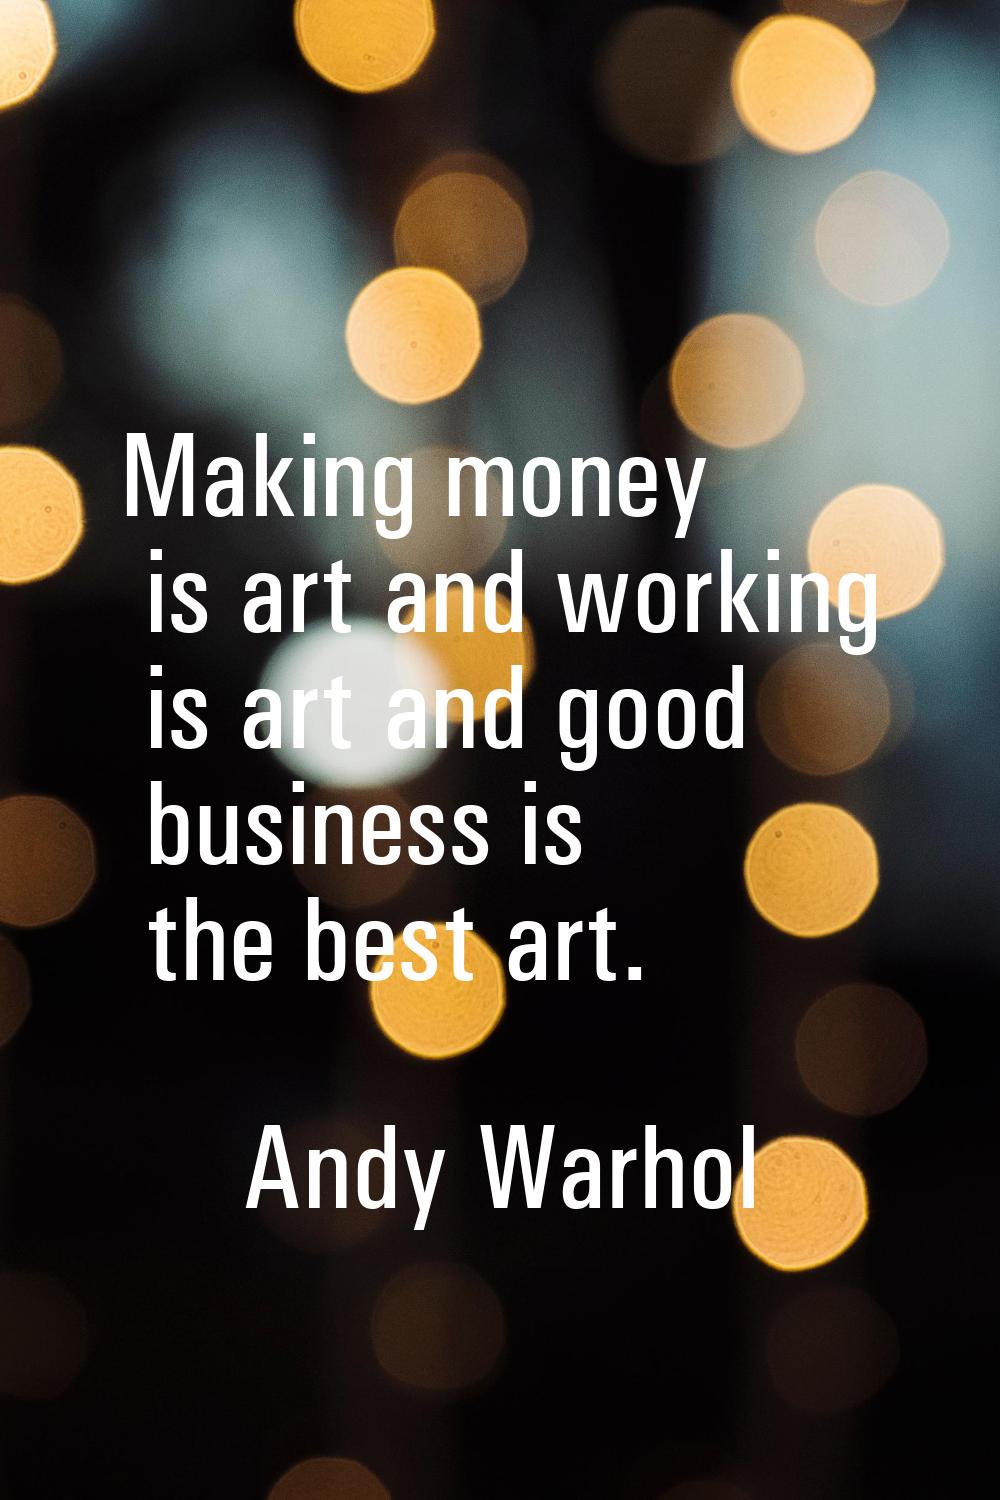 Making money is art and working is art and good business is the best art.